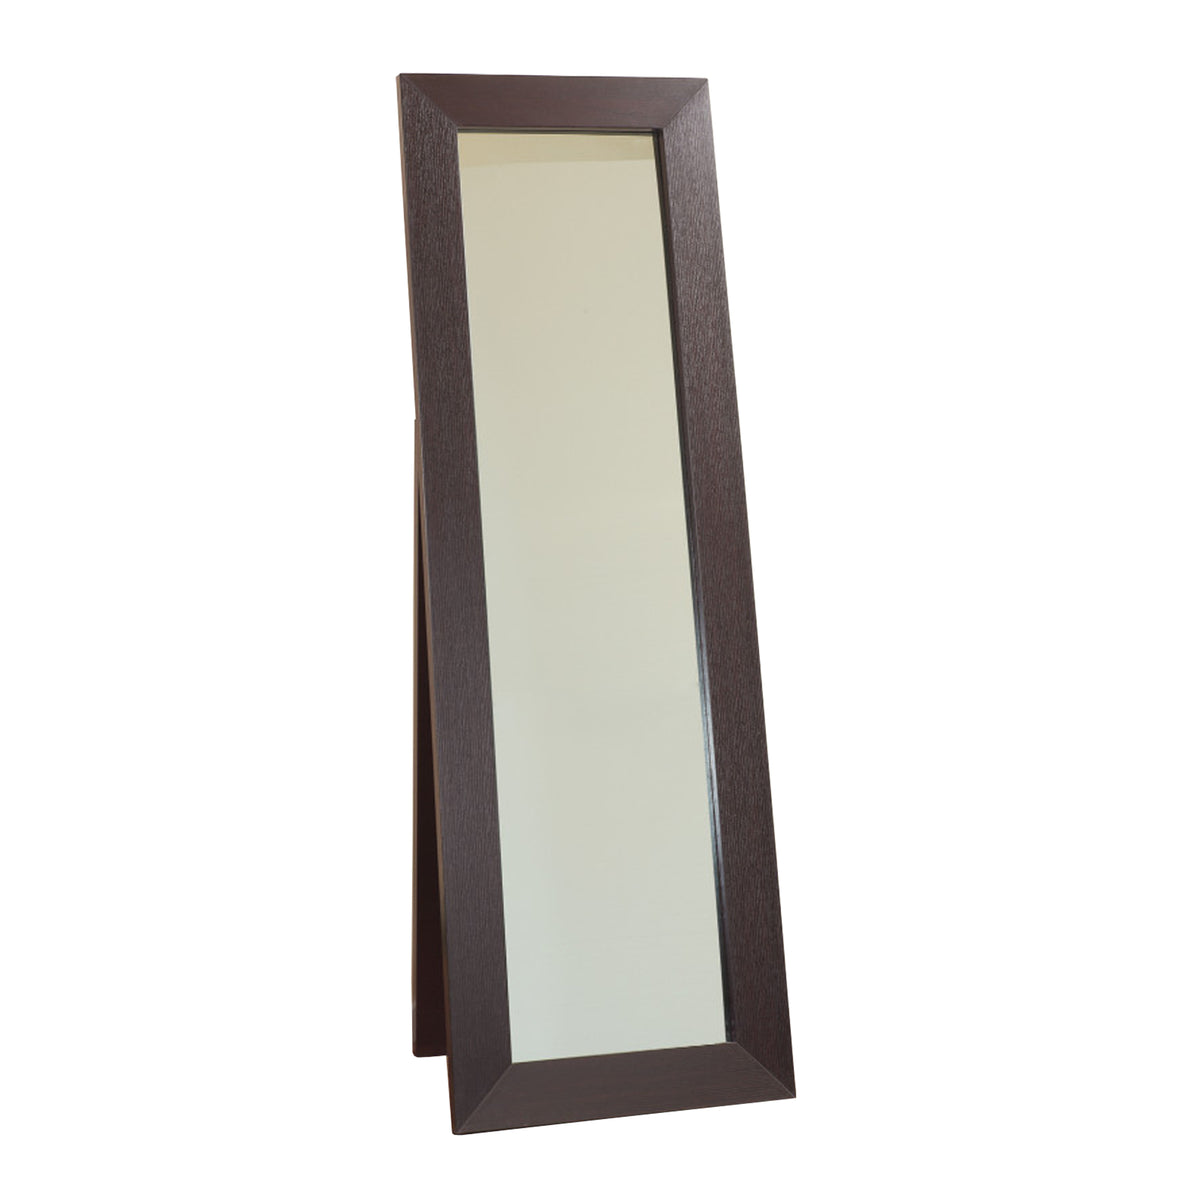 Aesthetic Accent Mirror With Wooden Framing, Dark Brown - BM148738